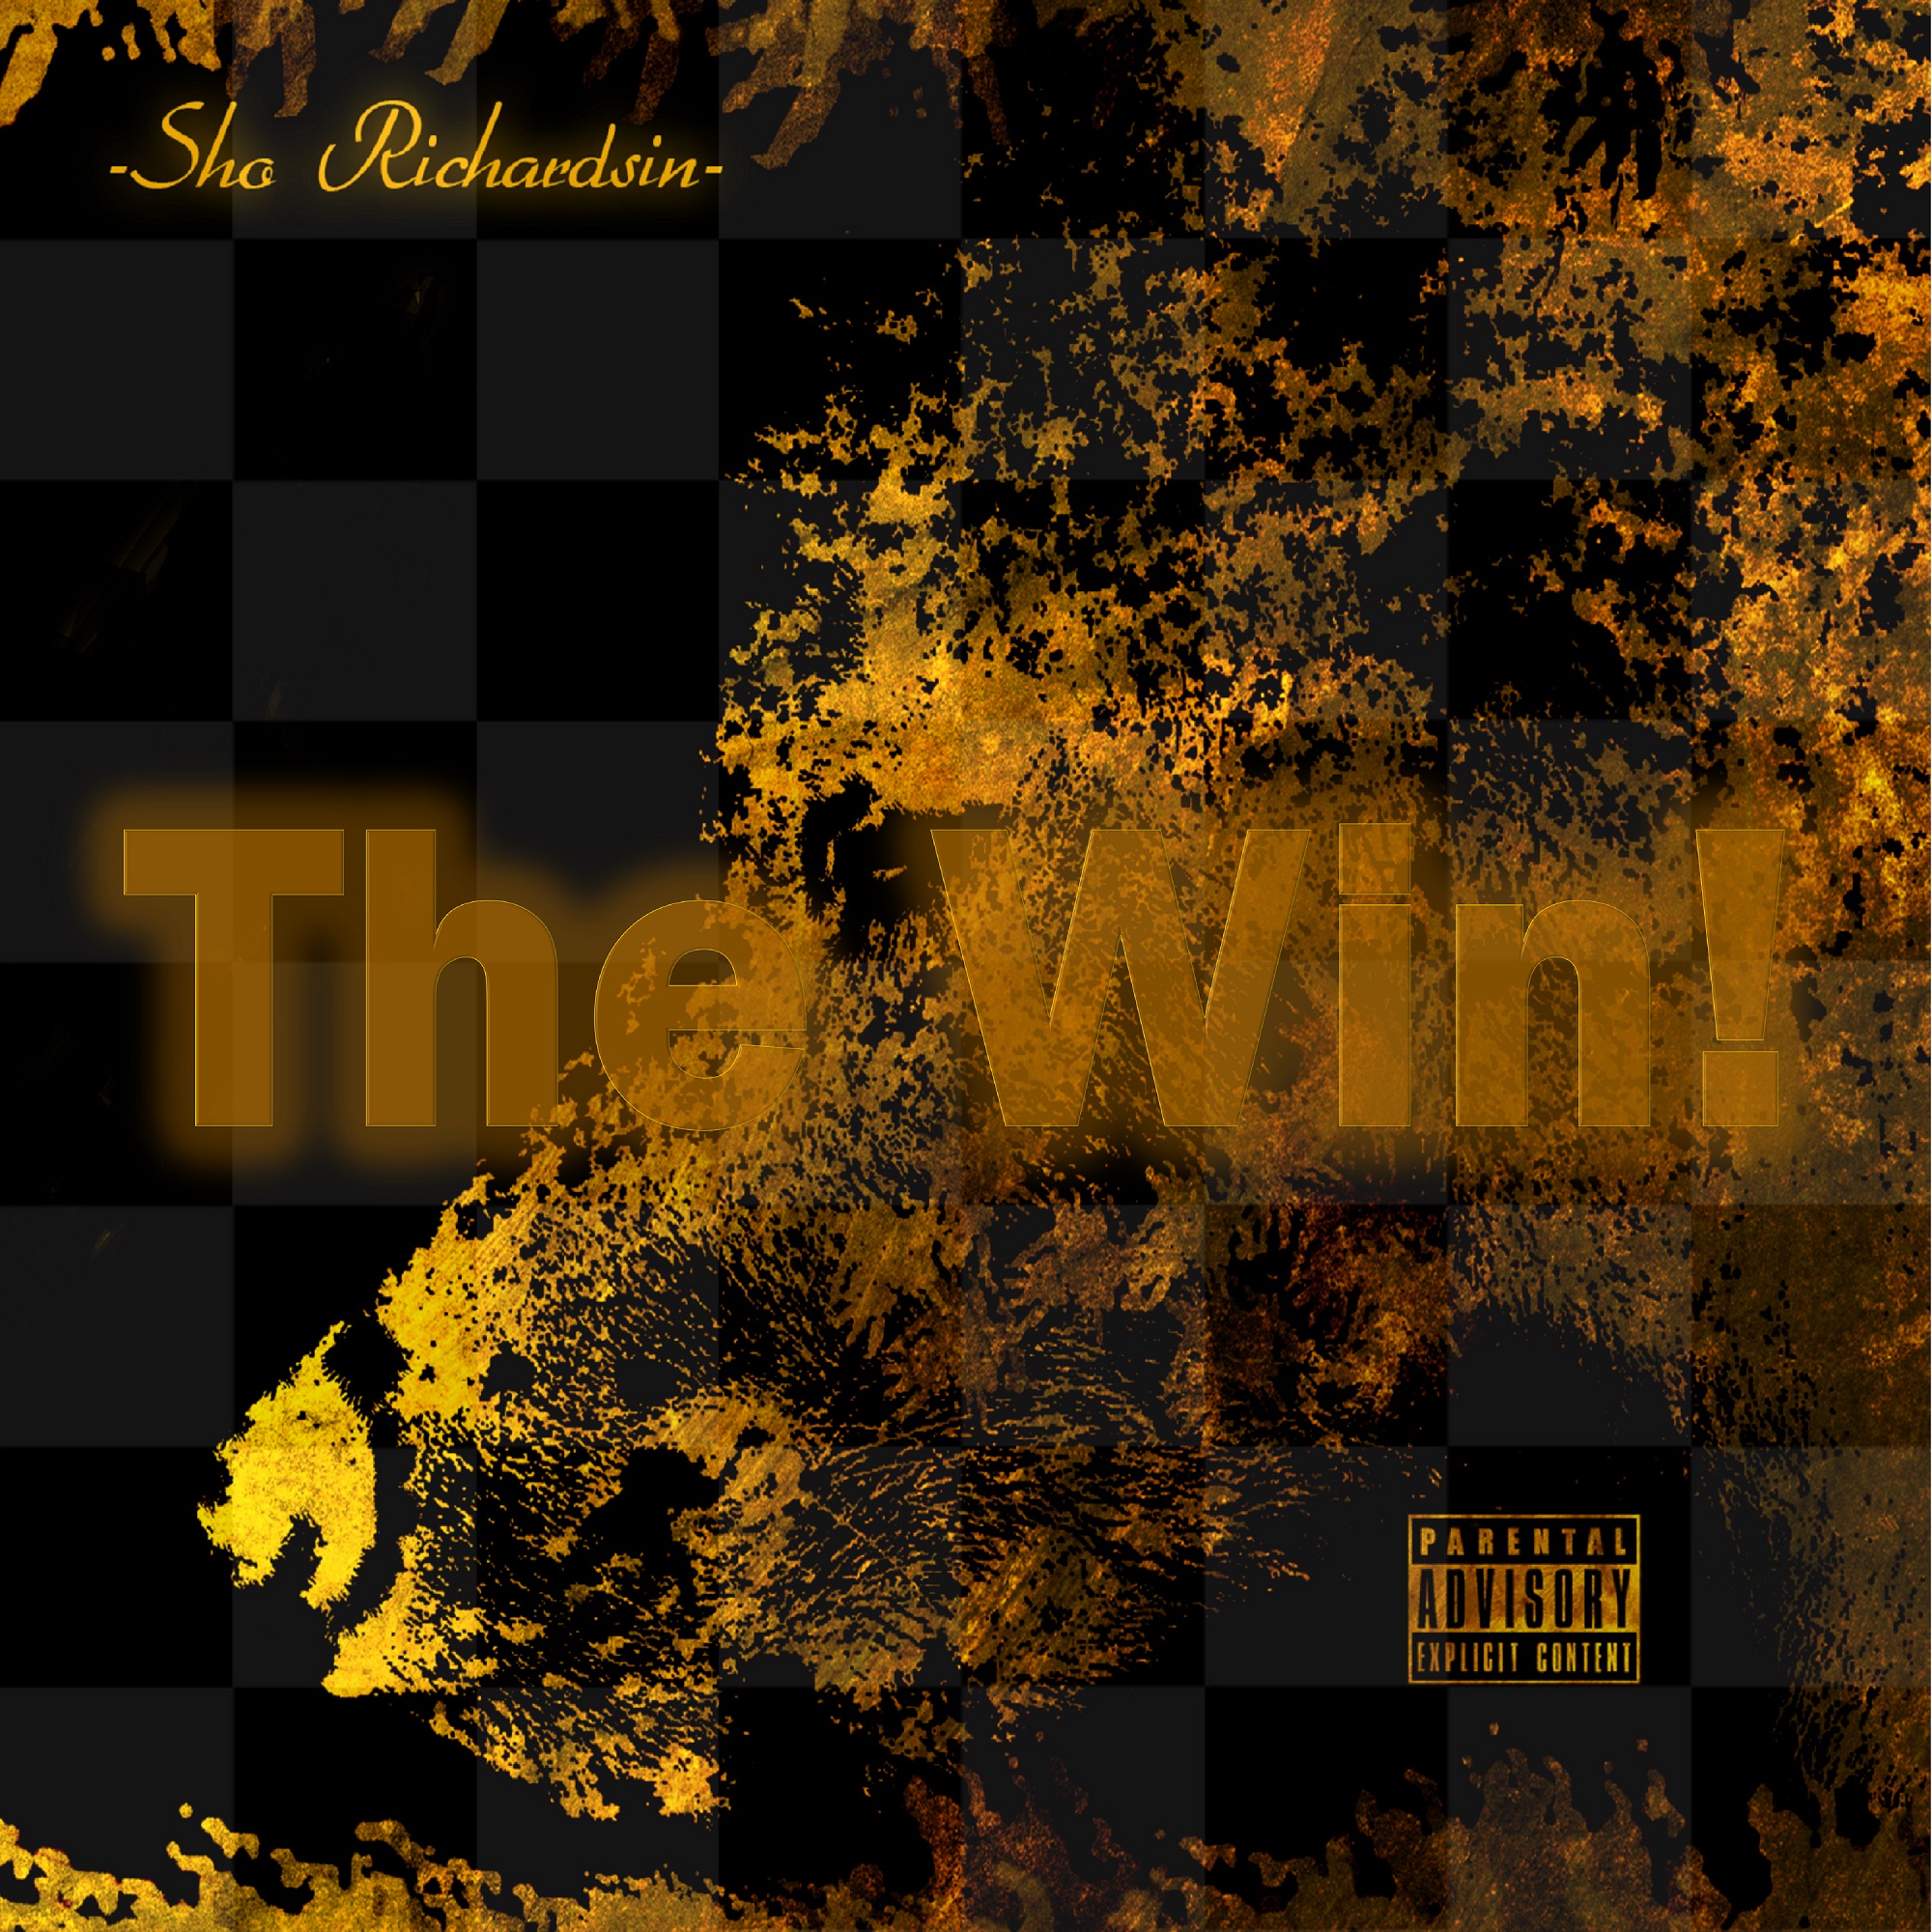 New Music: The Win available on Spotify, Apple Music, and more